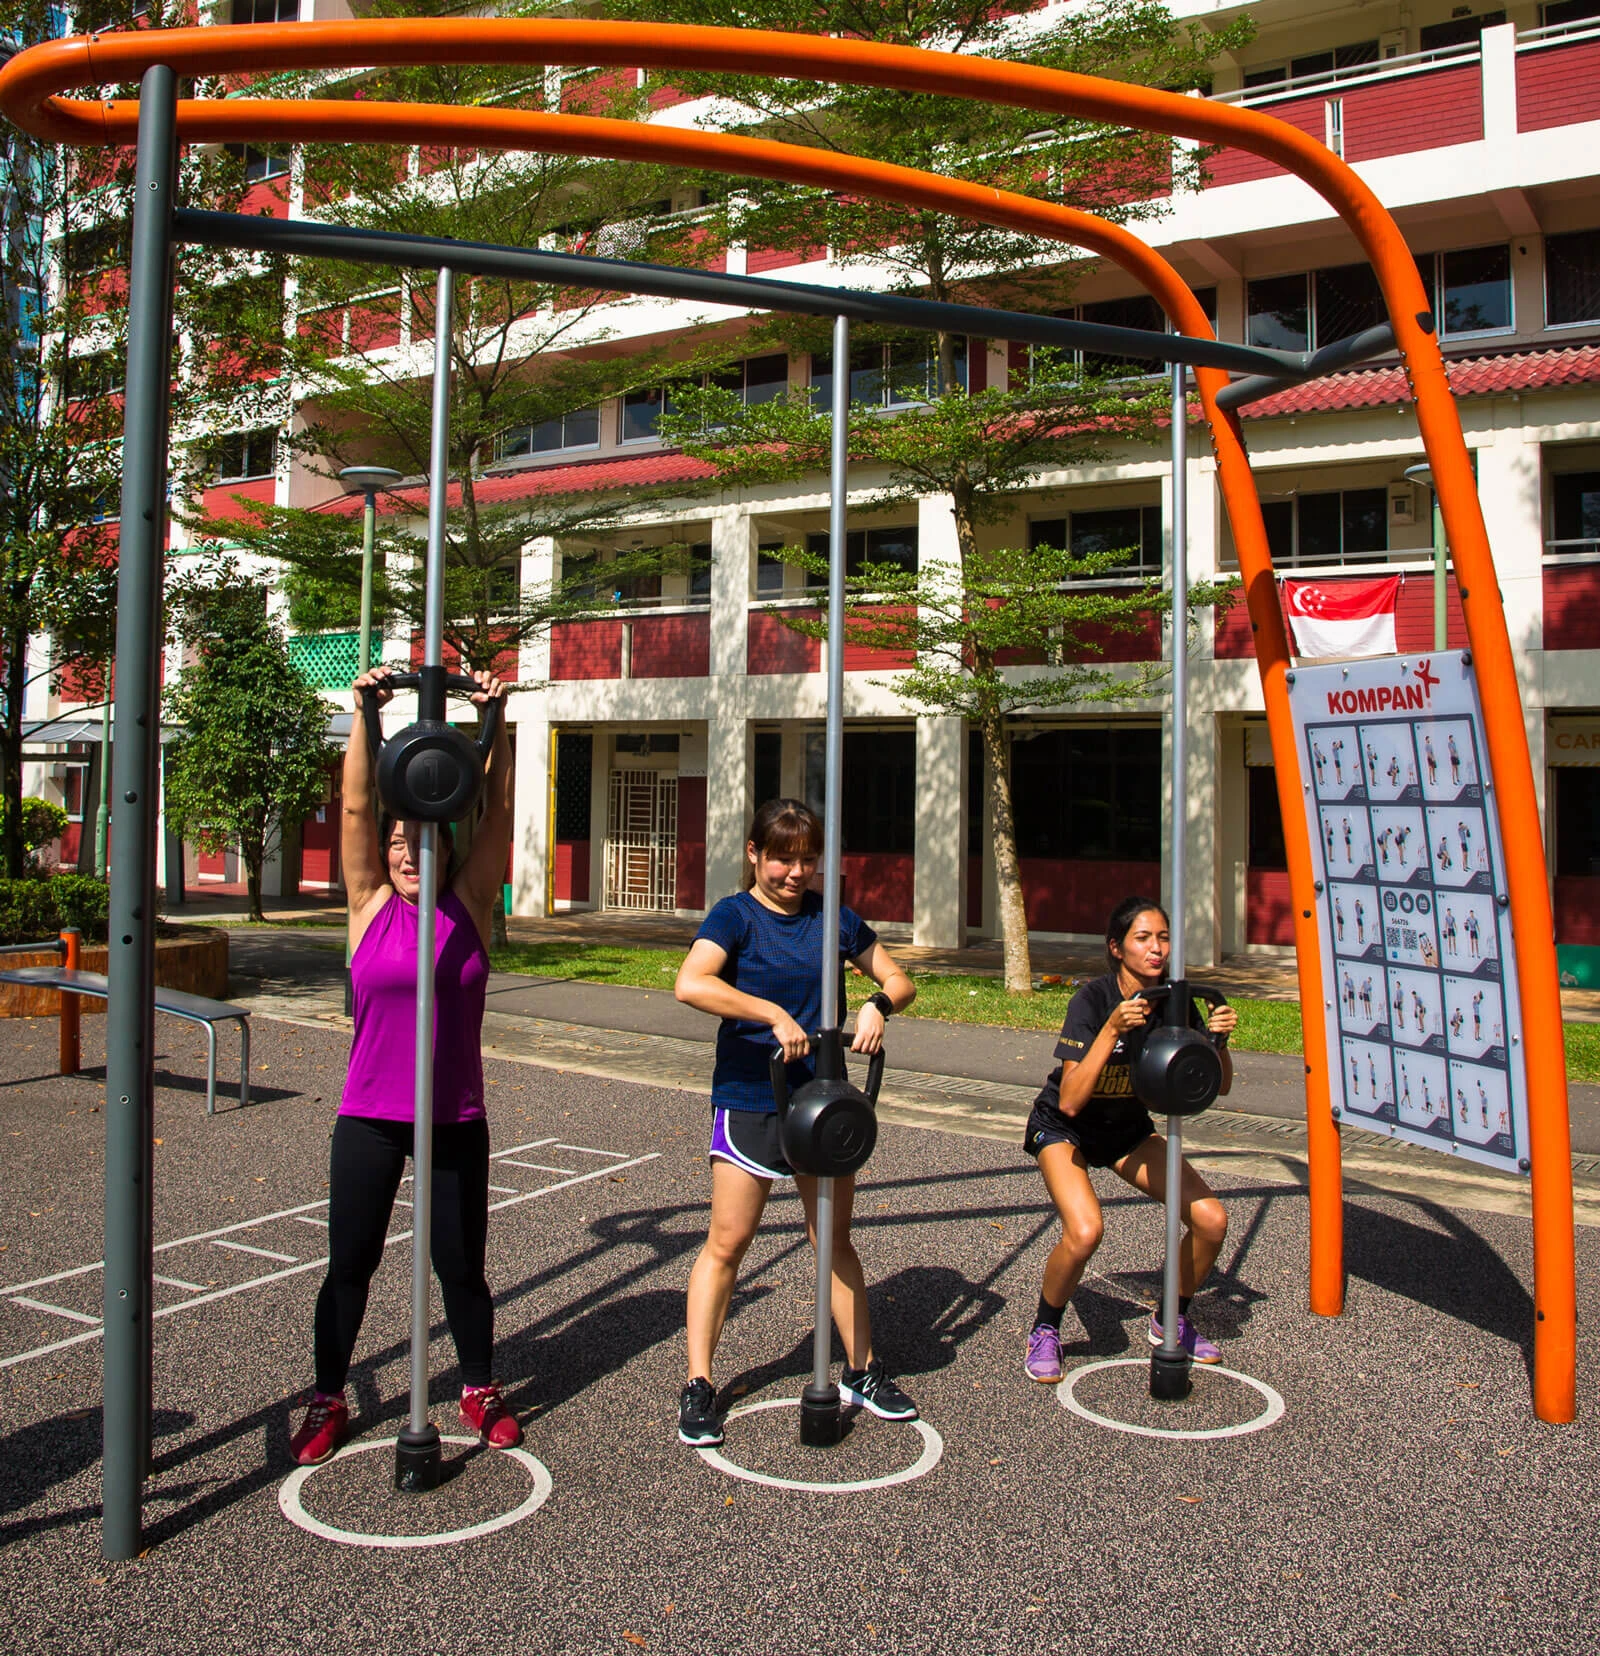 people working out at outdoor gym at Taman Jurong Park